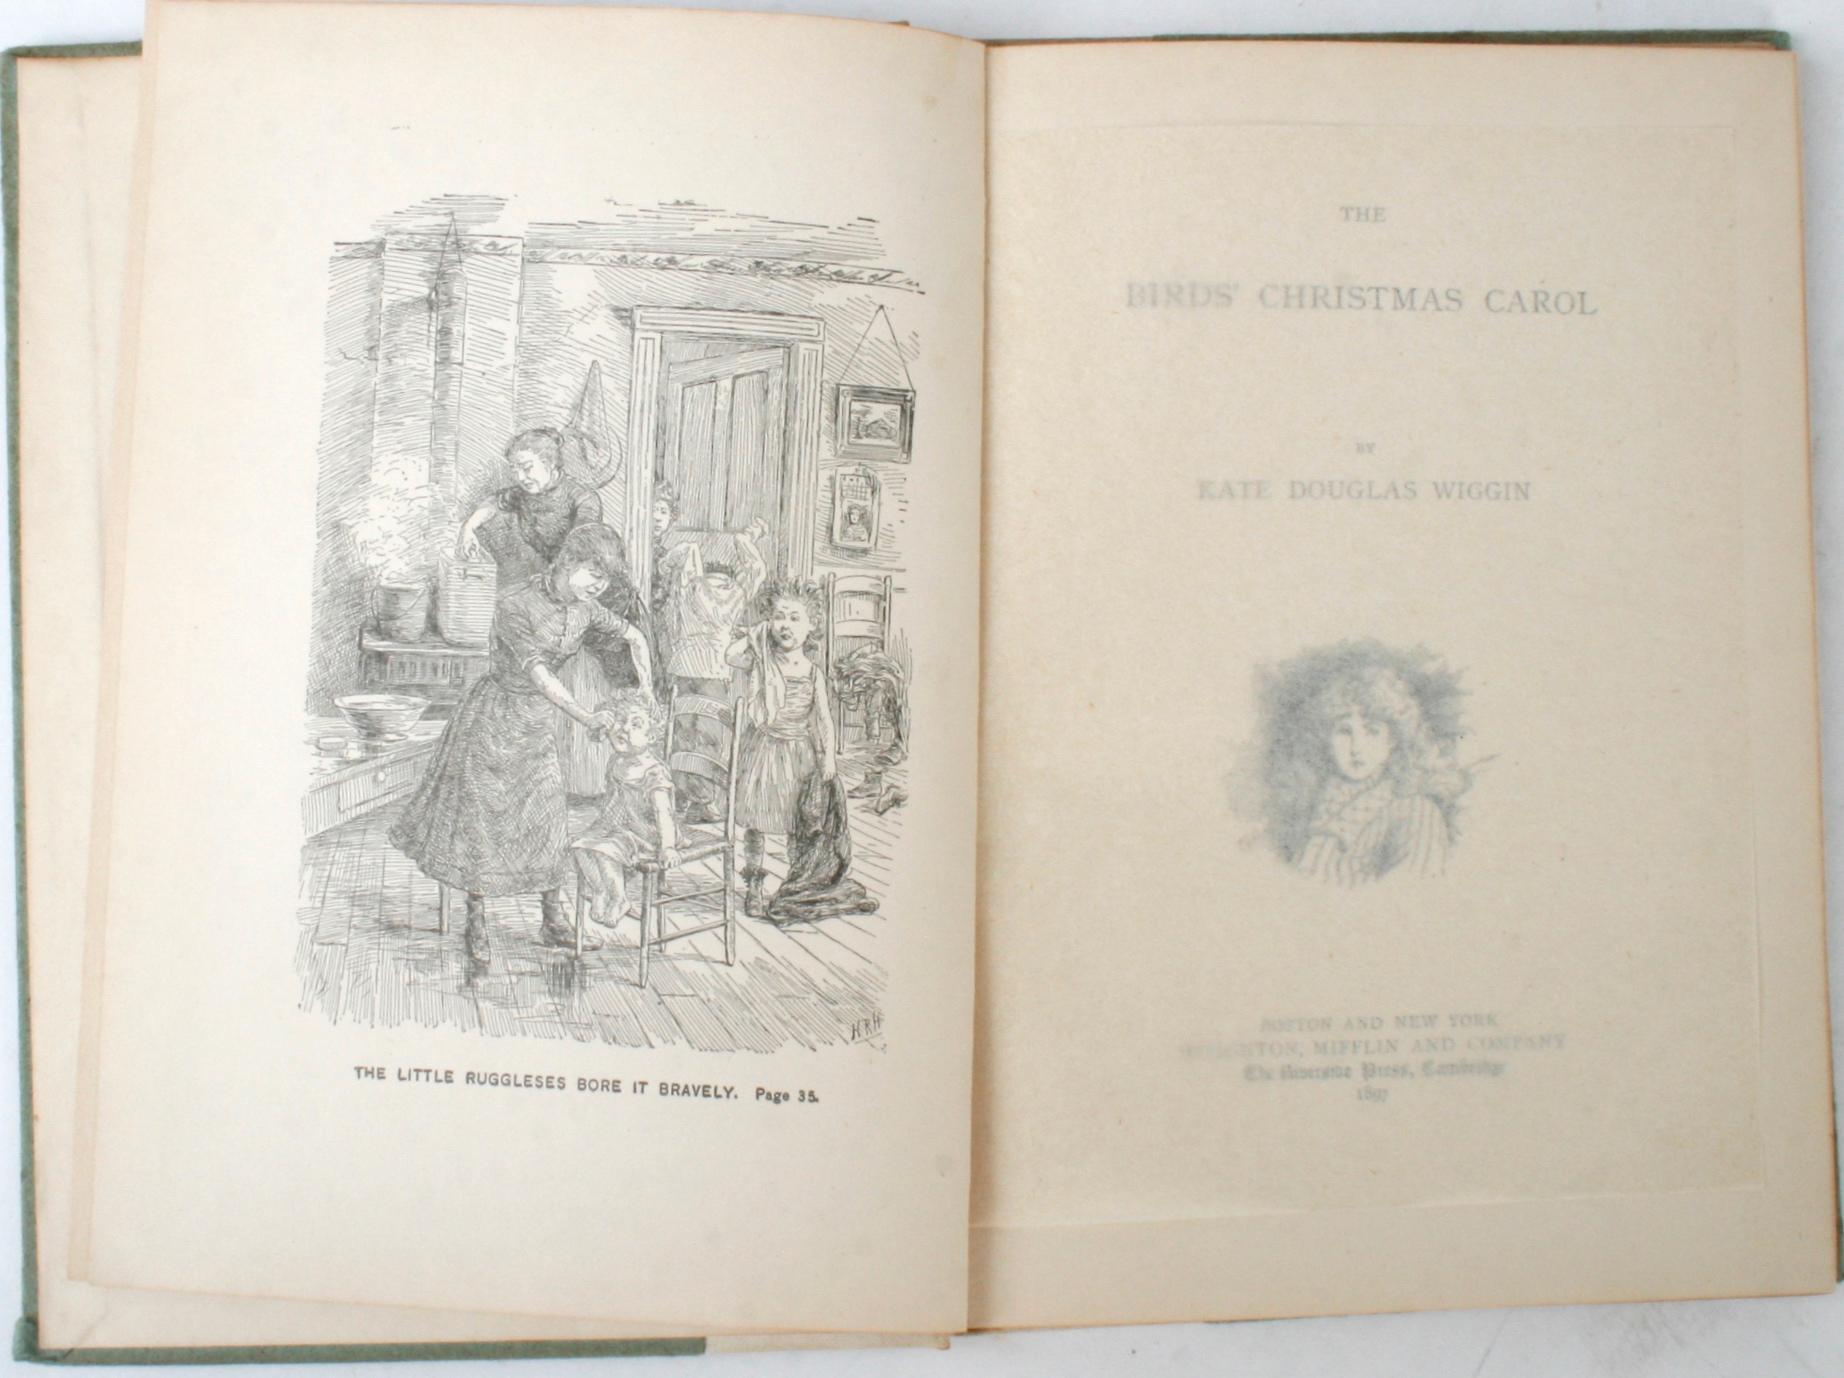 The Birds Christmas Carol by Kate Douglas Wiggin. Boston: Houghton, Mifflin and Company, 1897. Hardcover. 66 pp.
An antique book about carol bird, an unusually loving and generous young girl who has a positive effect on everyone she meets. She is